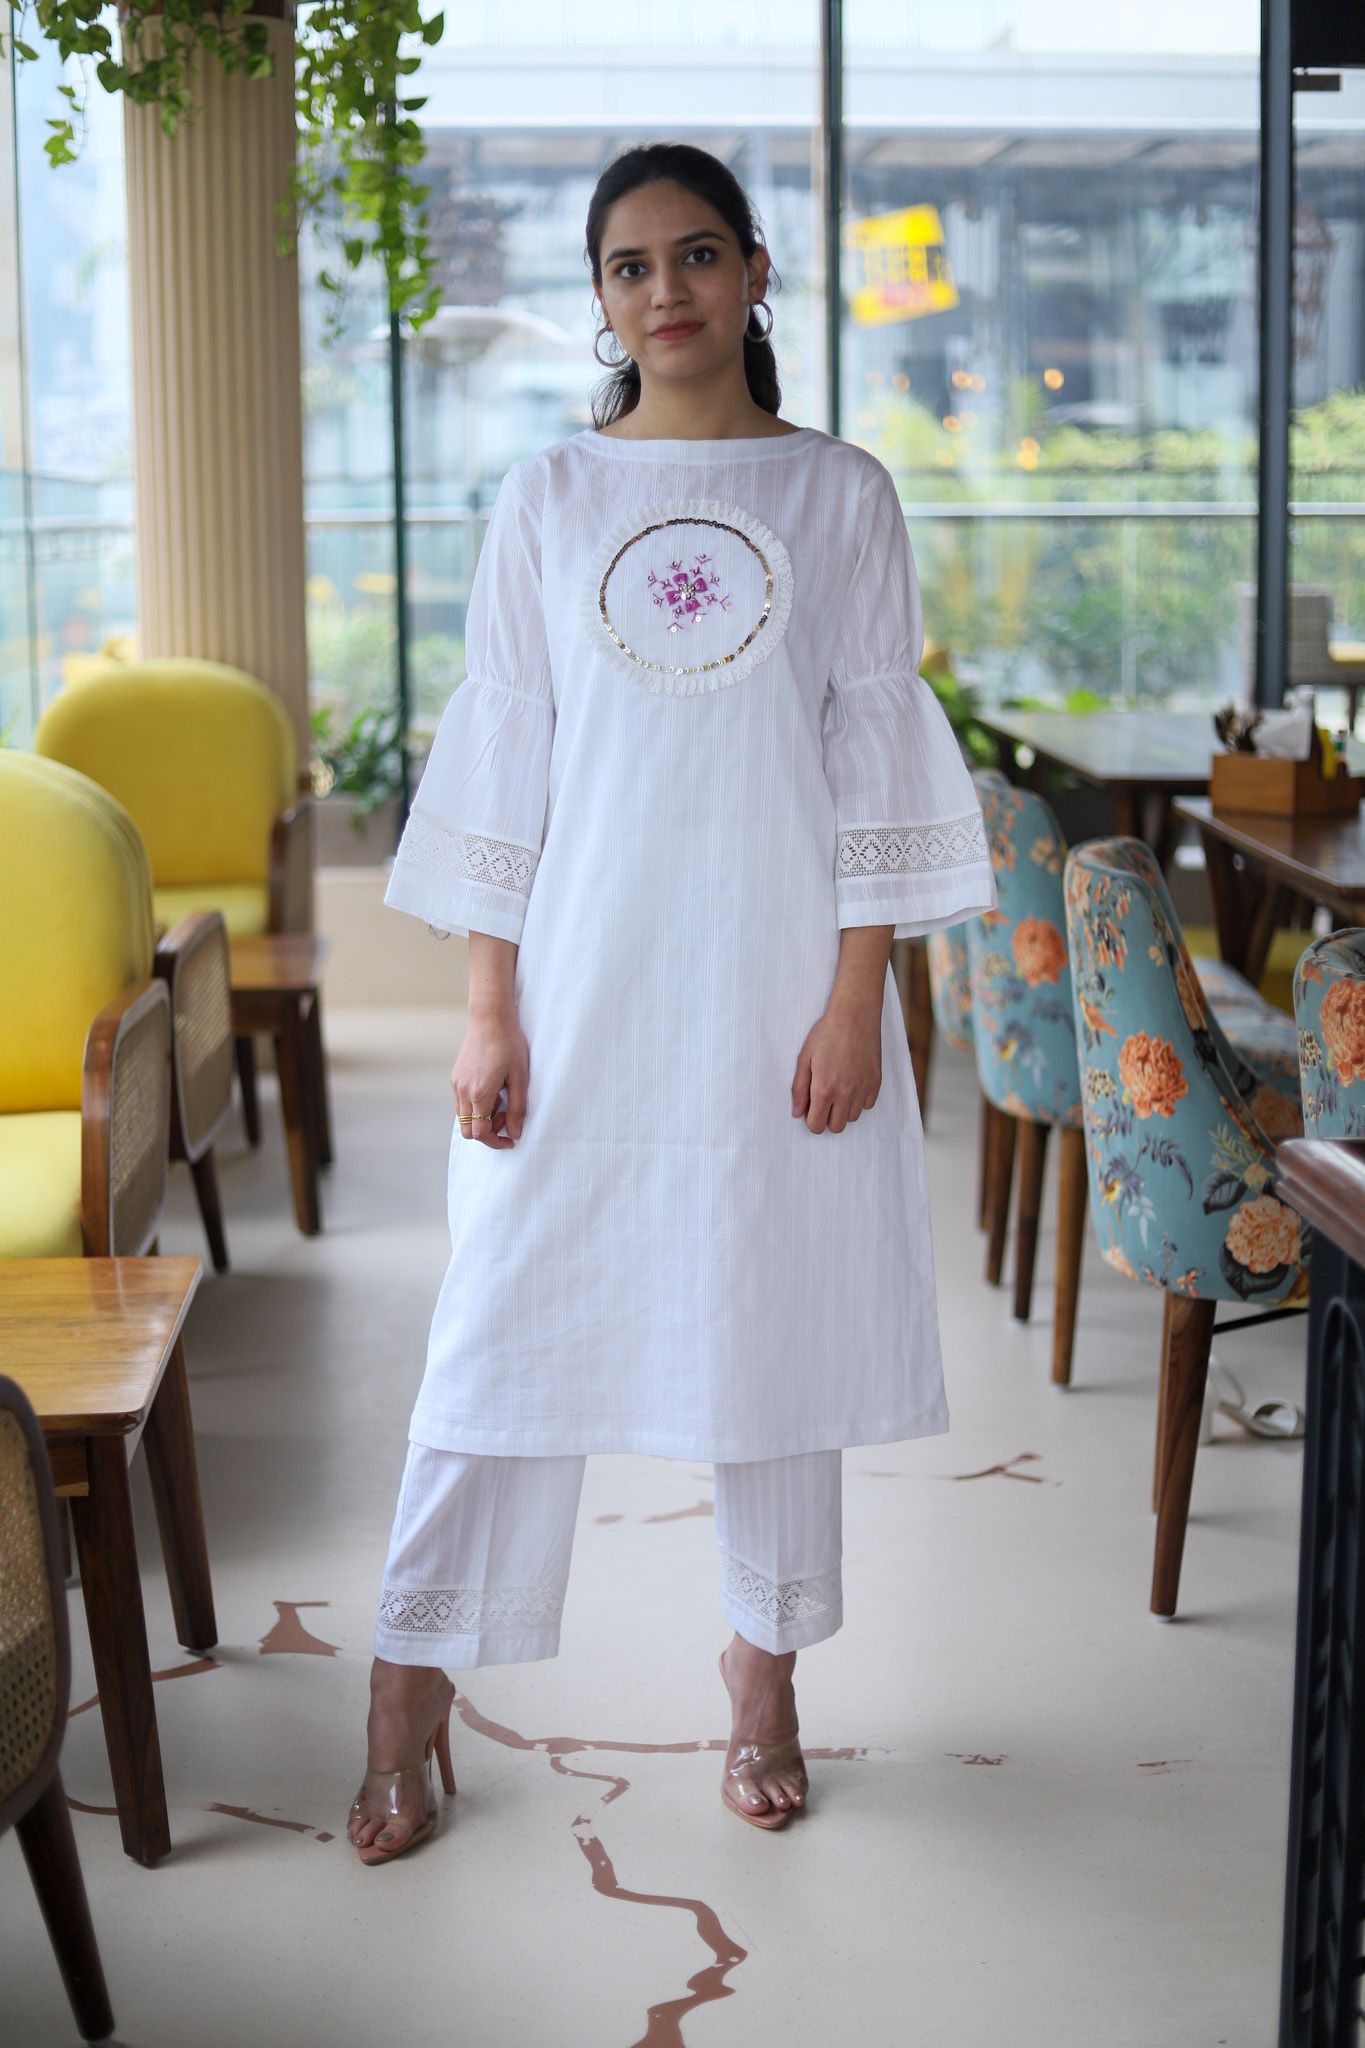 Kurta or Kurtis  Everything About This Indian Outfit For Women And Men   Utsavpedia